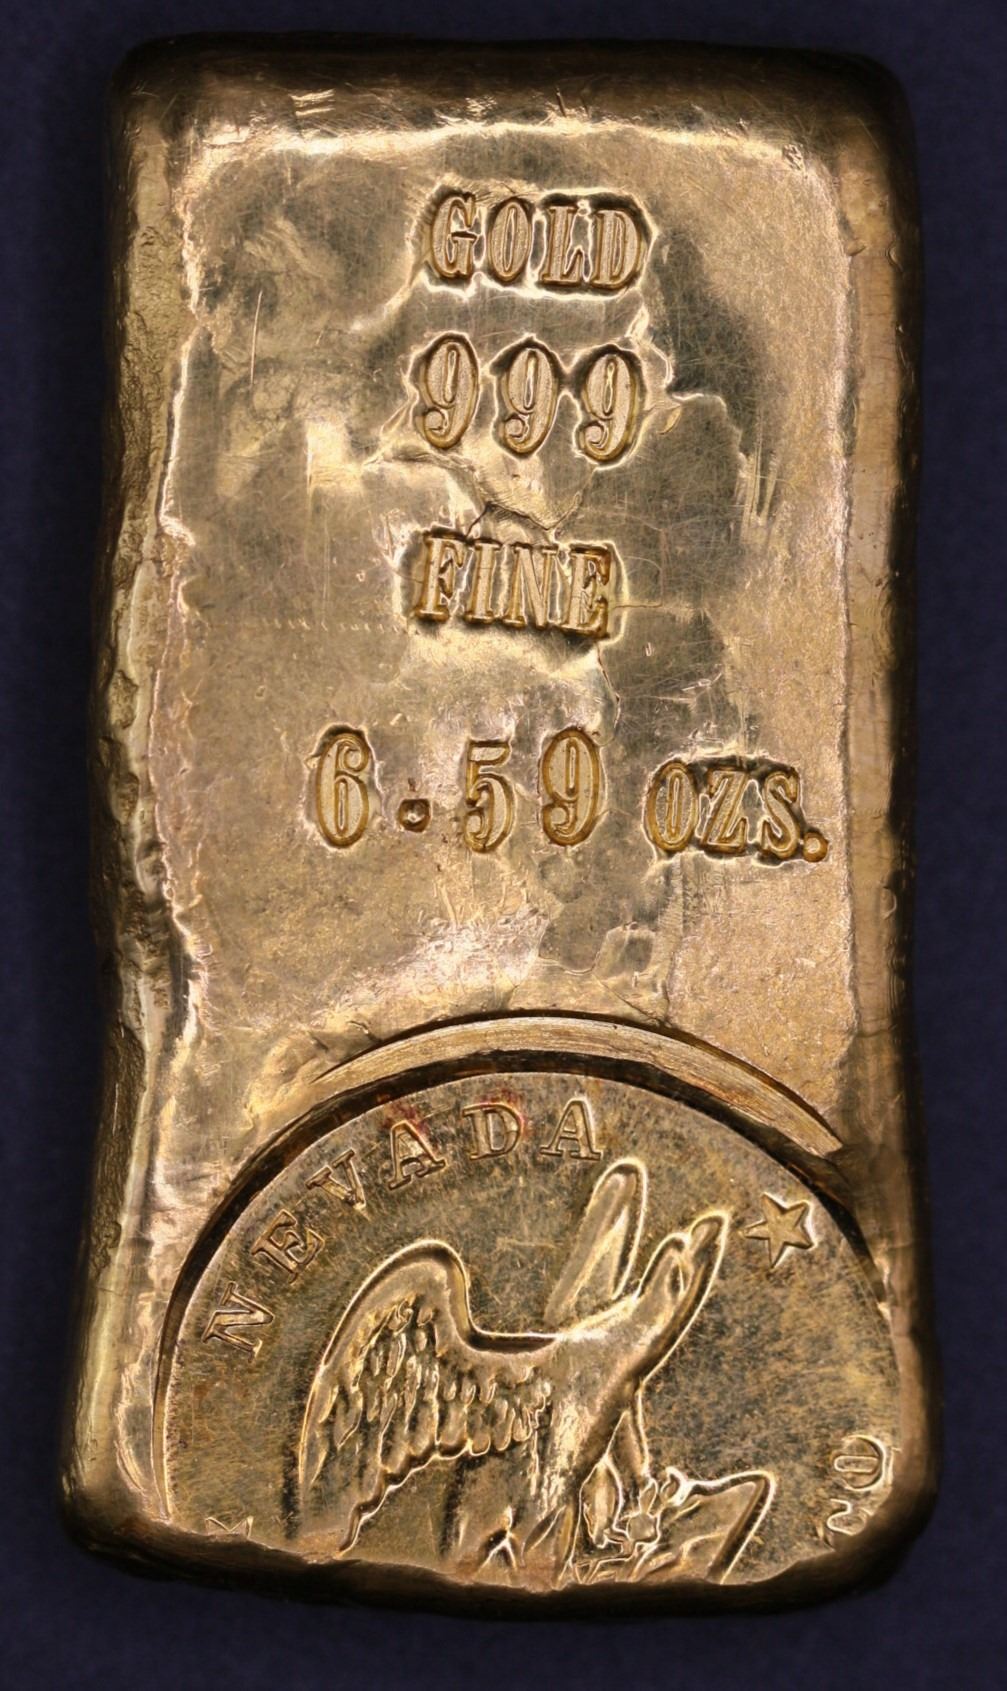 Nevada Silver Company Gold Specimen Piece from The Franklin Hoard